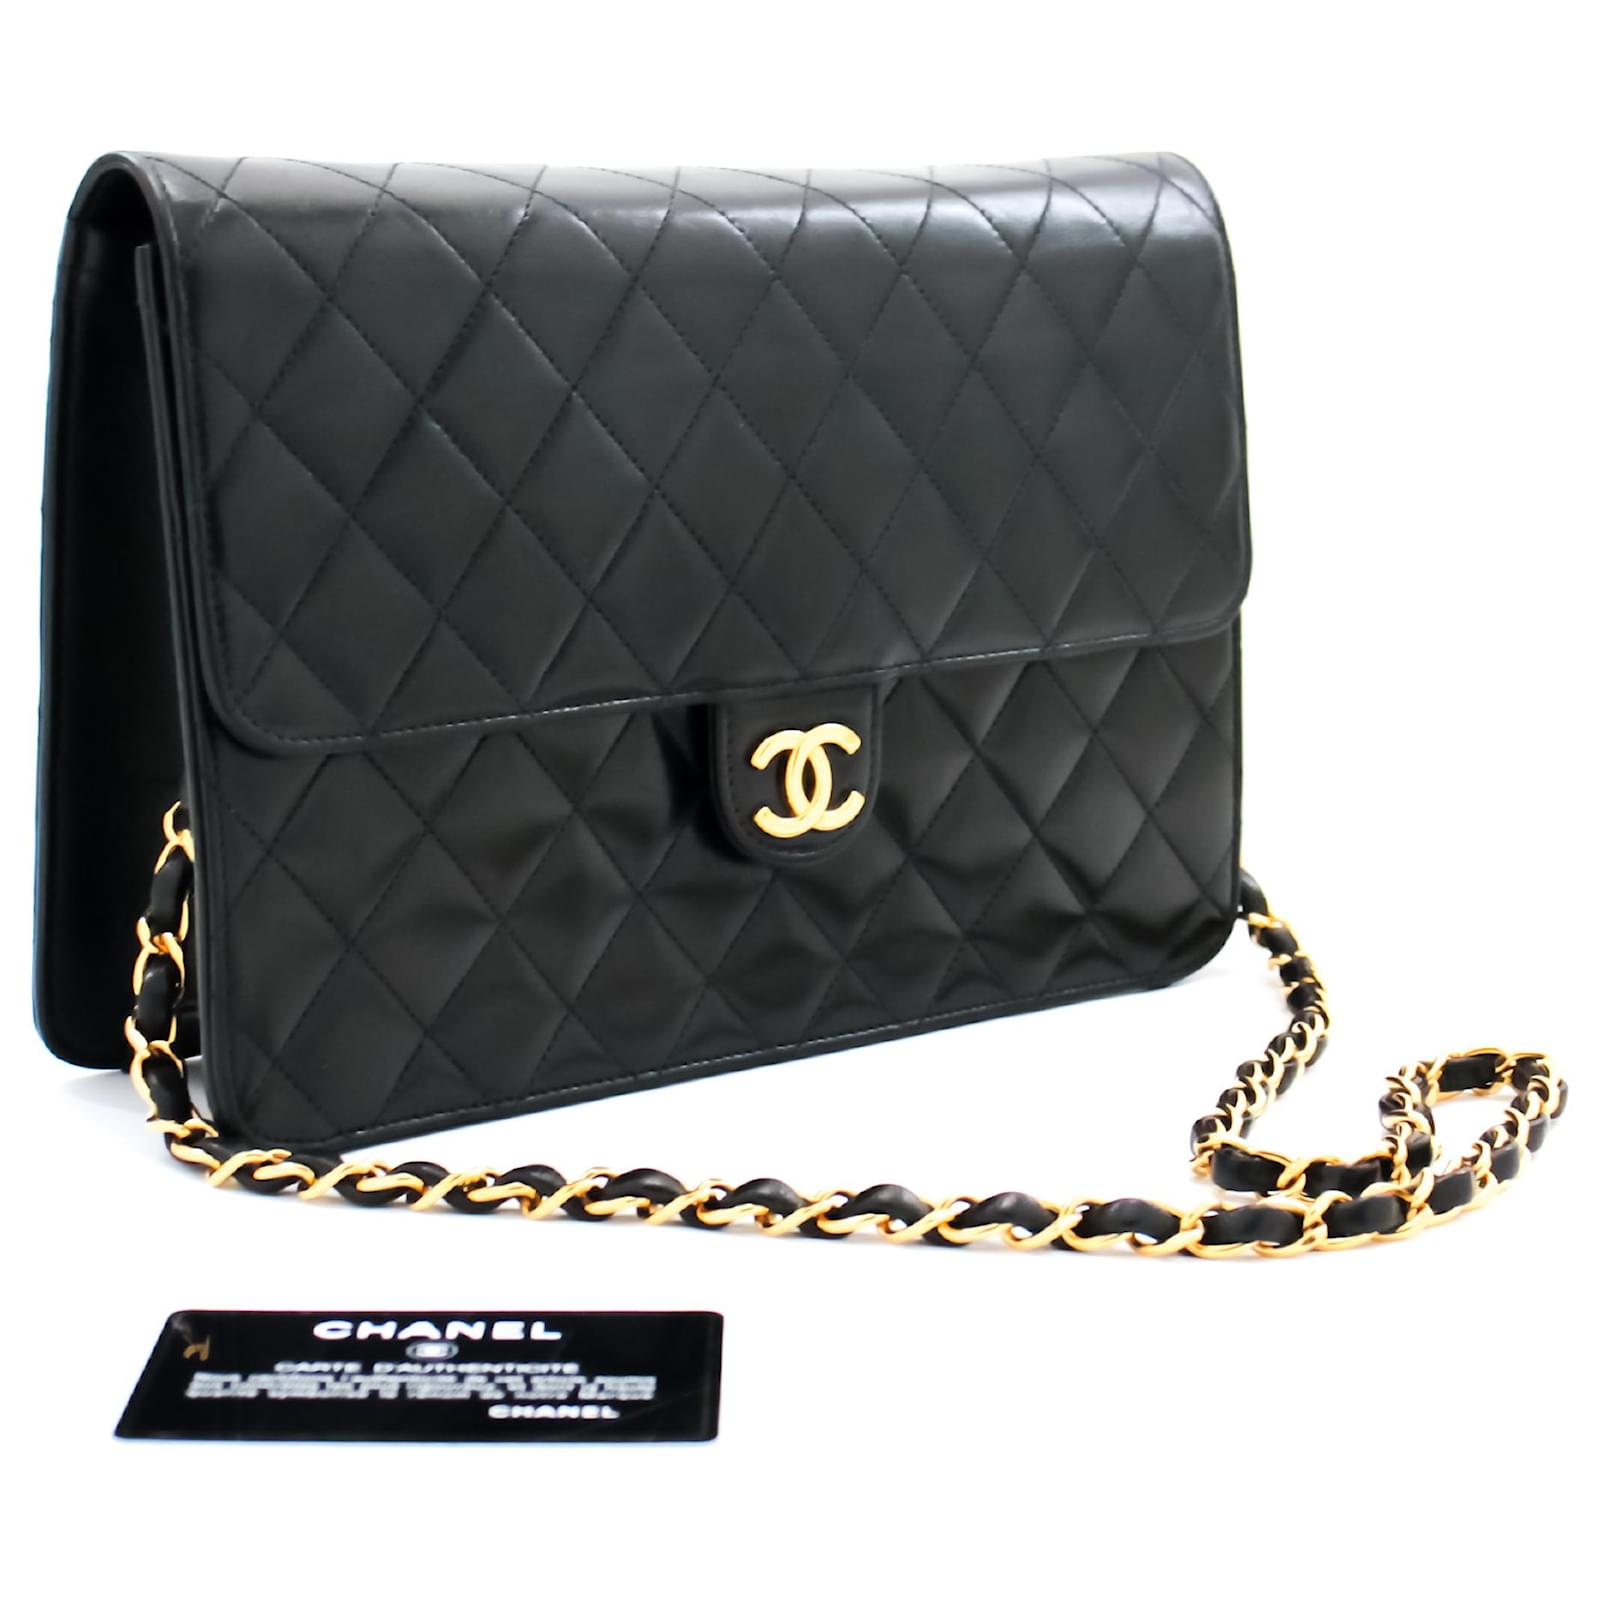 k05 CHANEL Authentic Chain Shoulder Bag Clutch Black Quilted Flap Lambskin  Purse